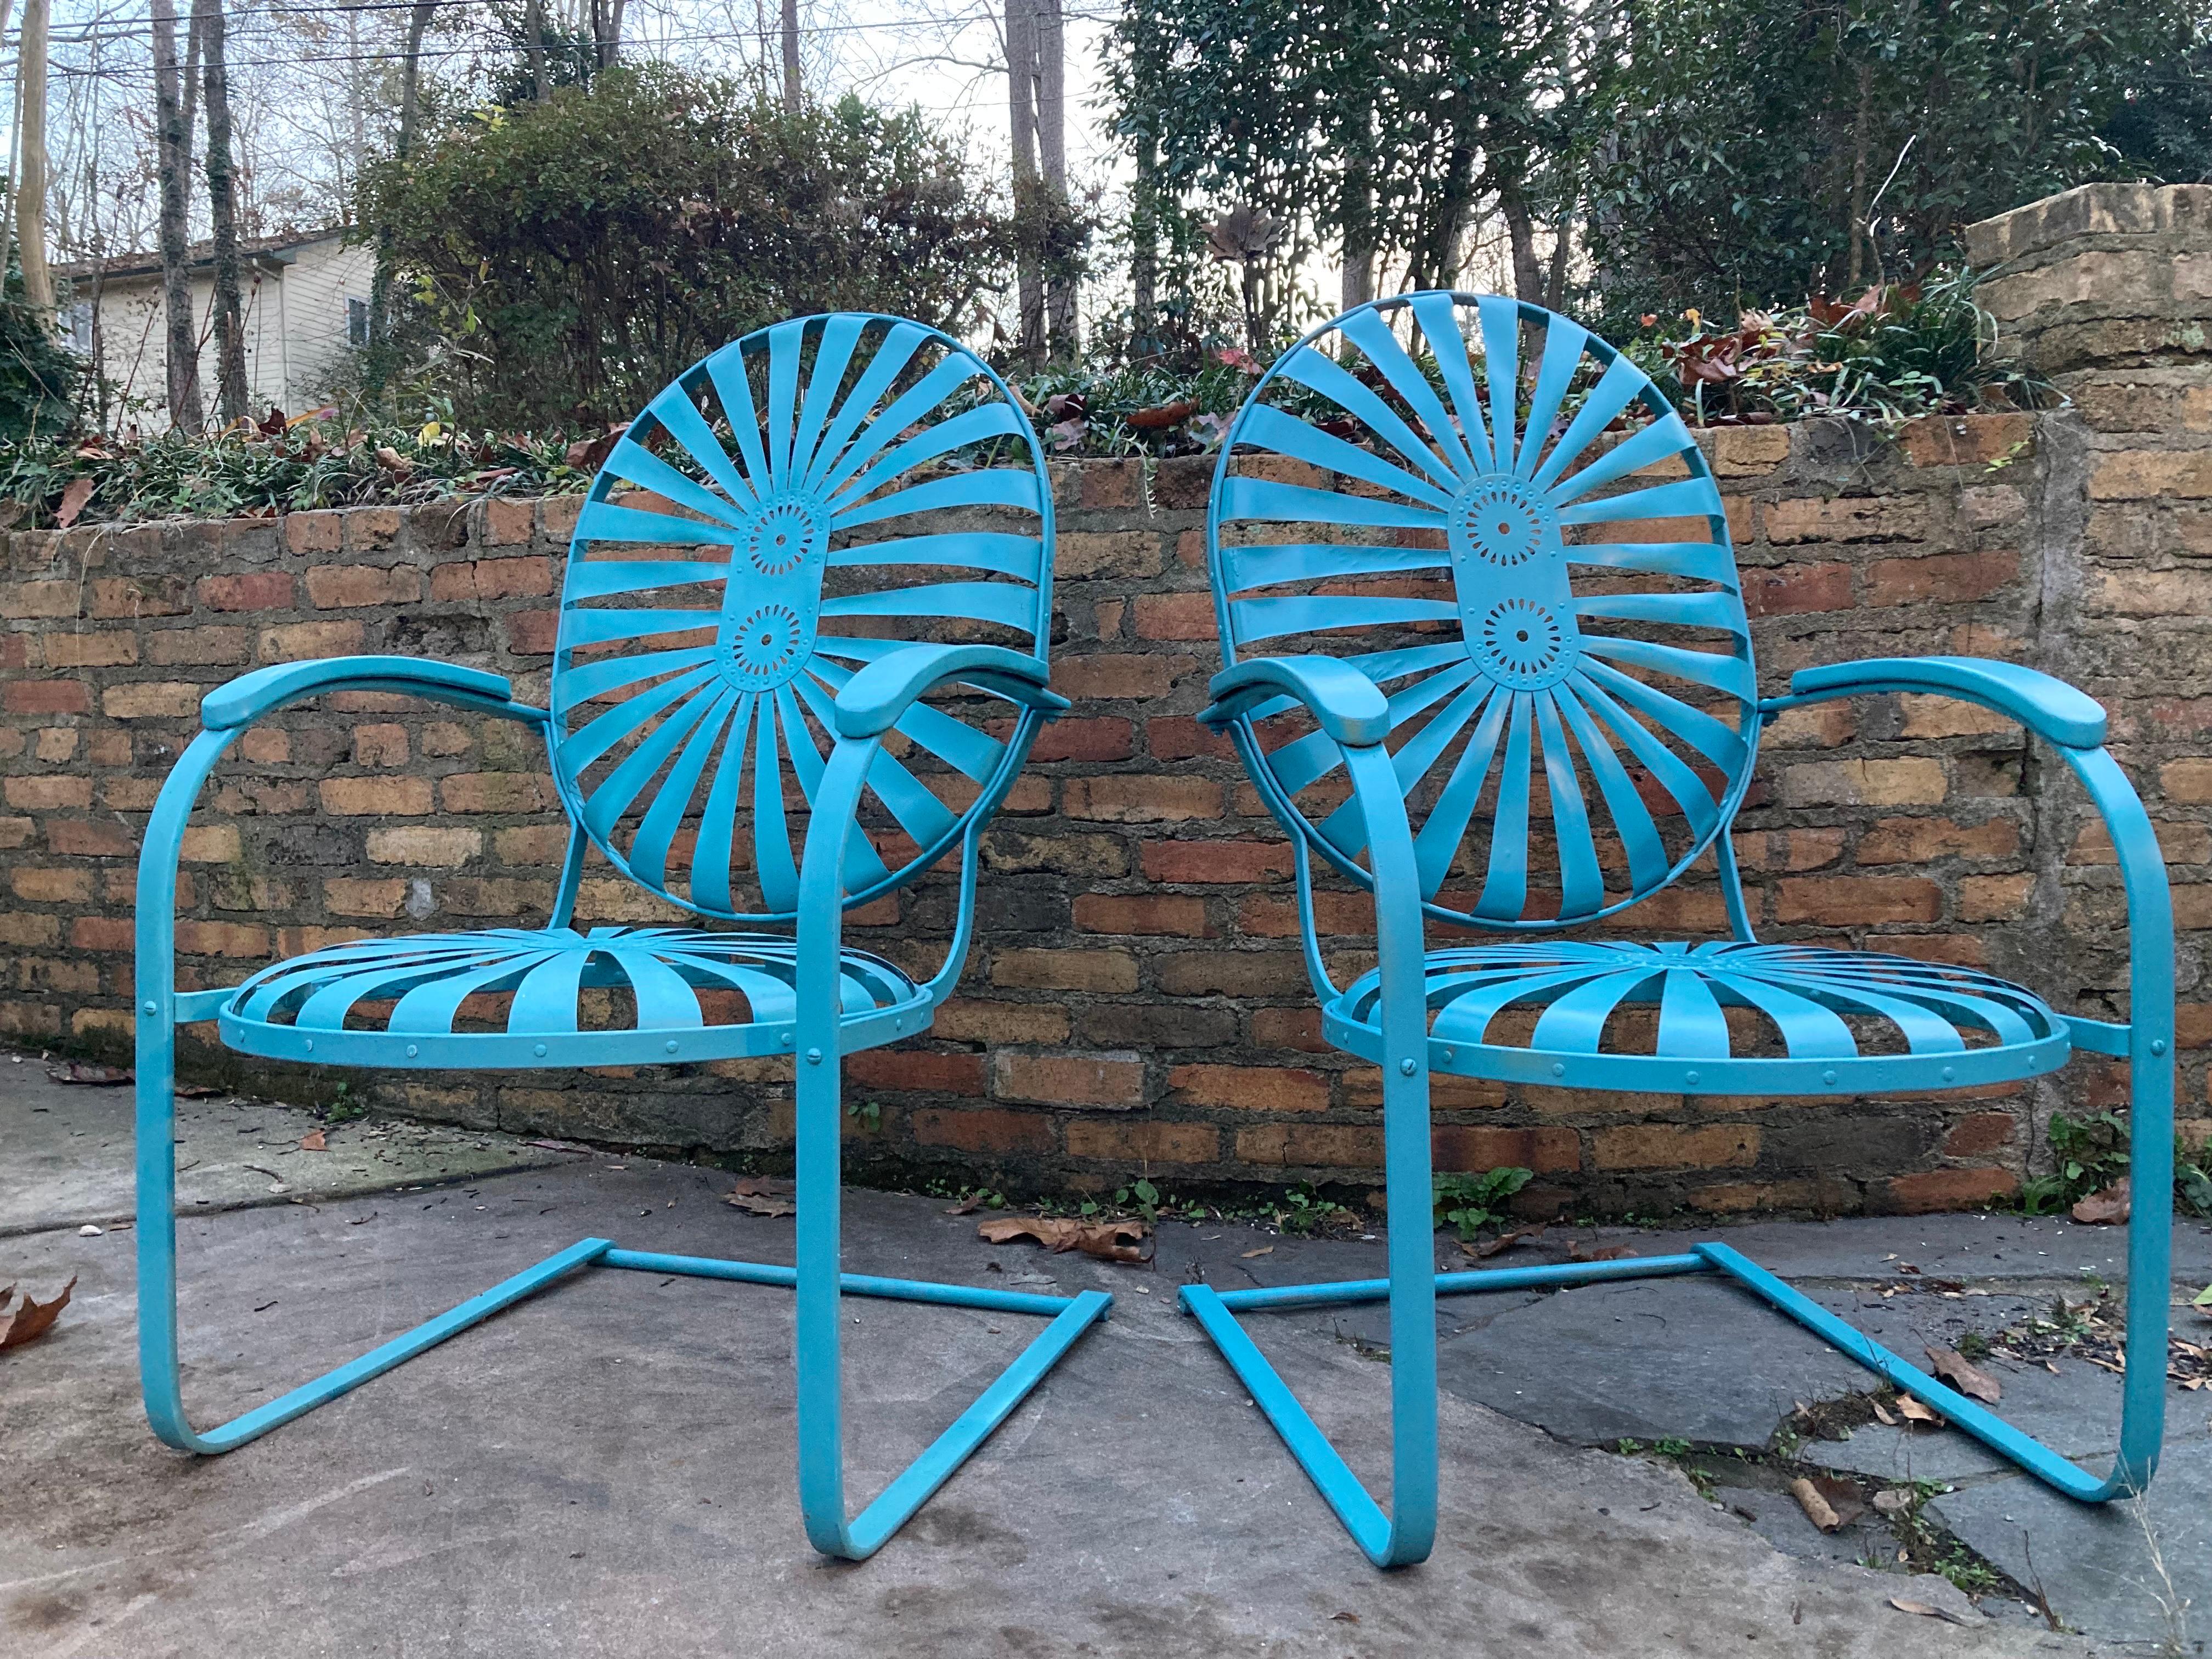 French Francois Carre Large Garden Cantilever Teal Rocking Chairs.   For Sale